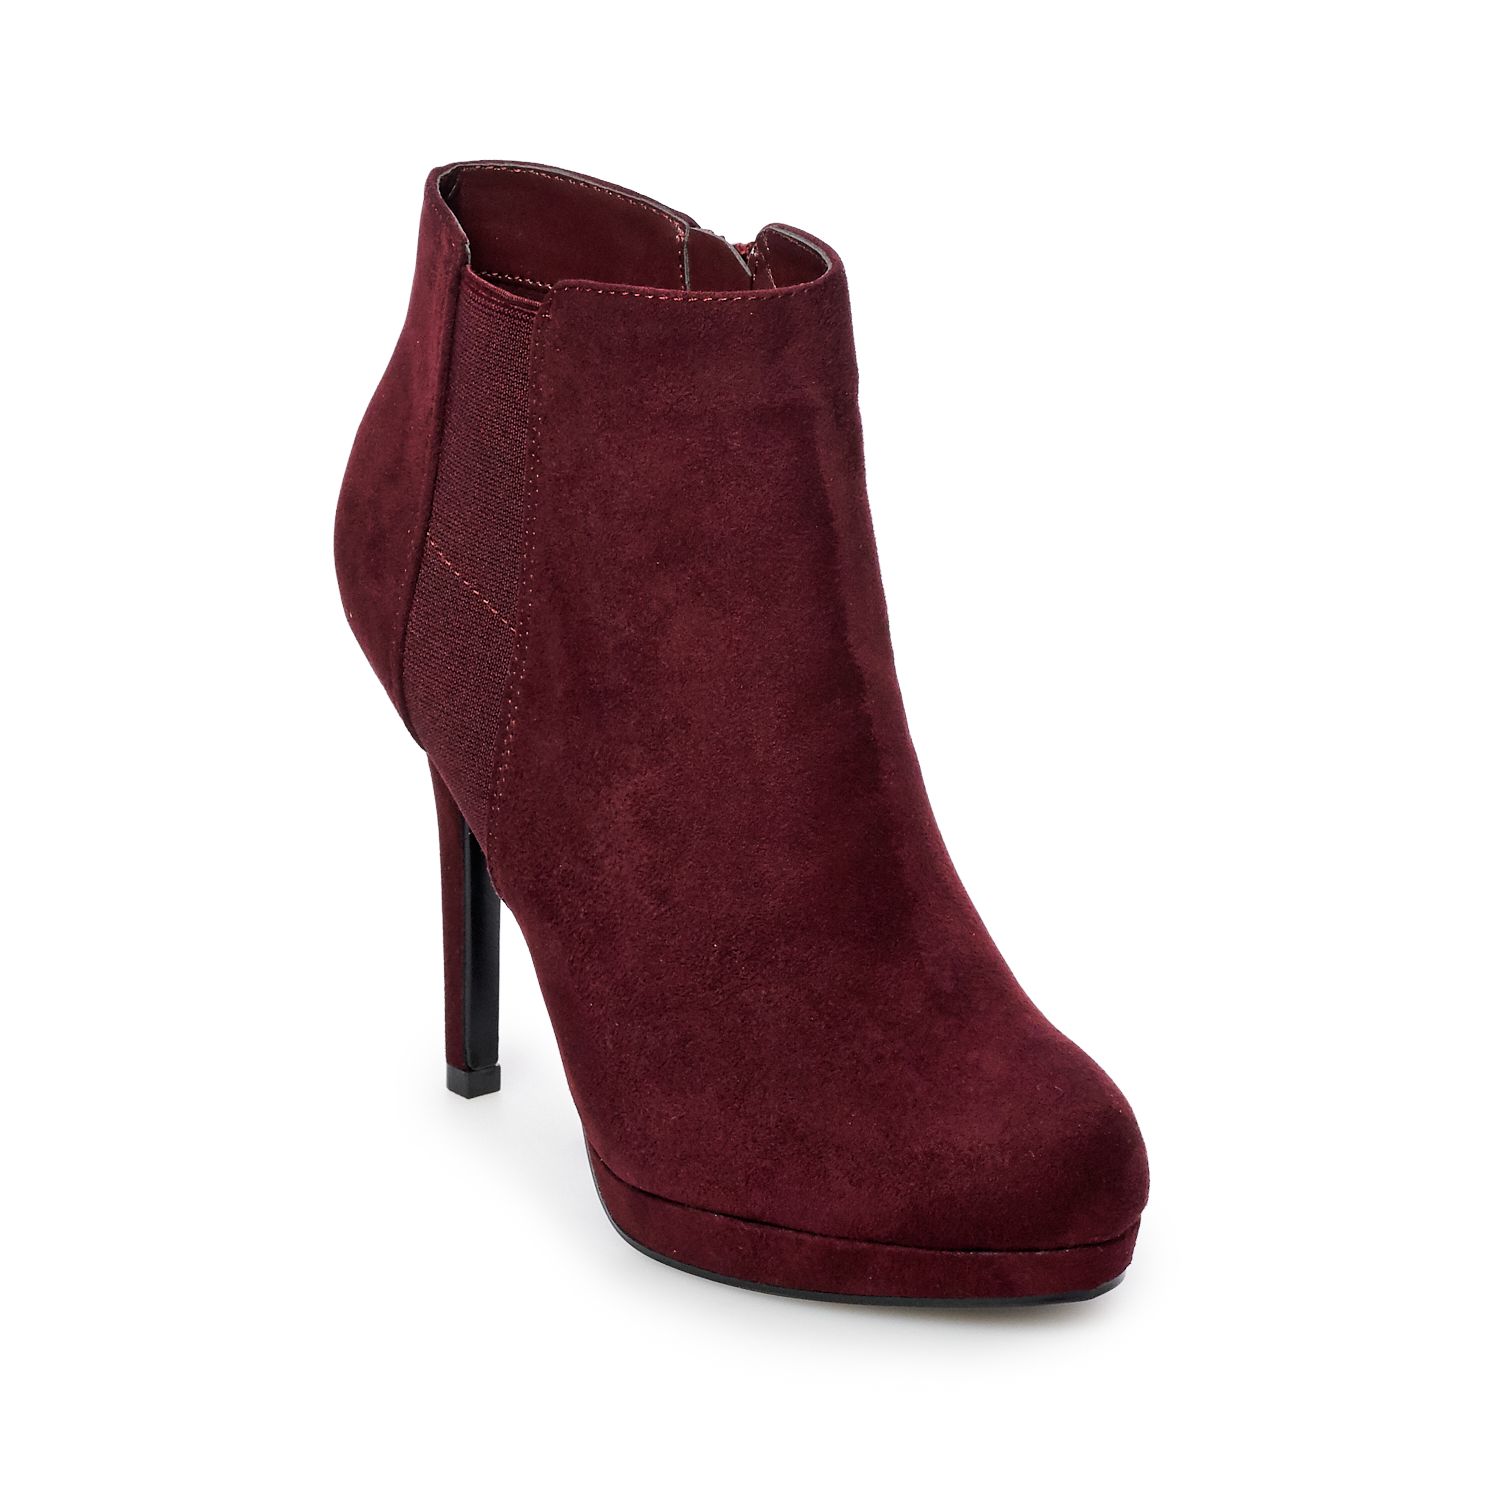 women's high heel ankle boots